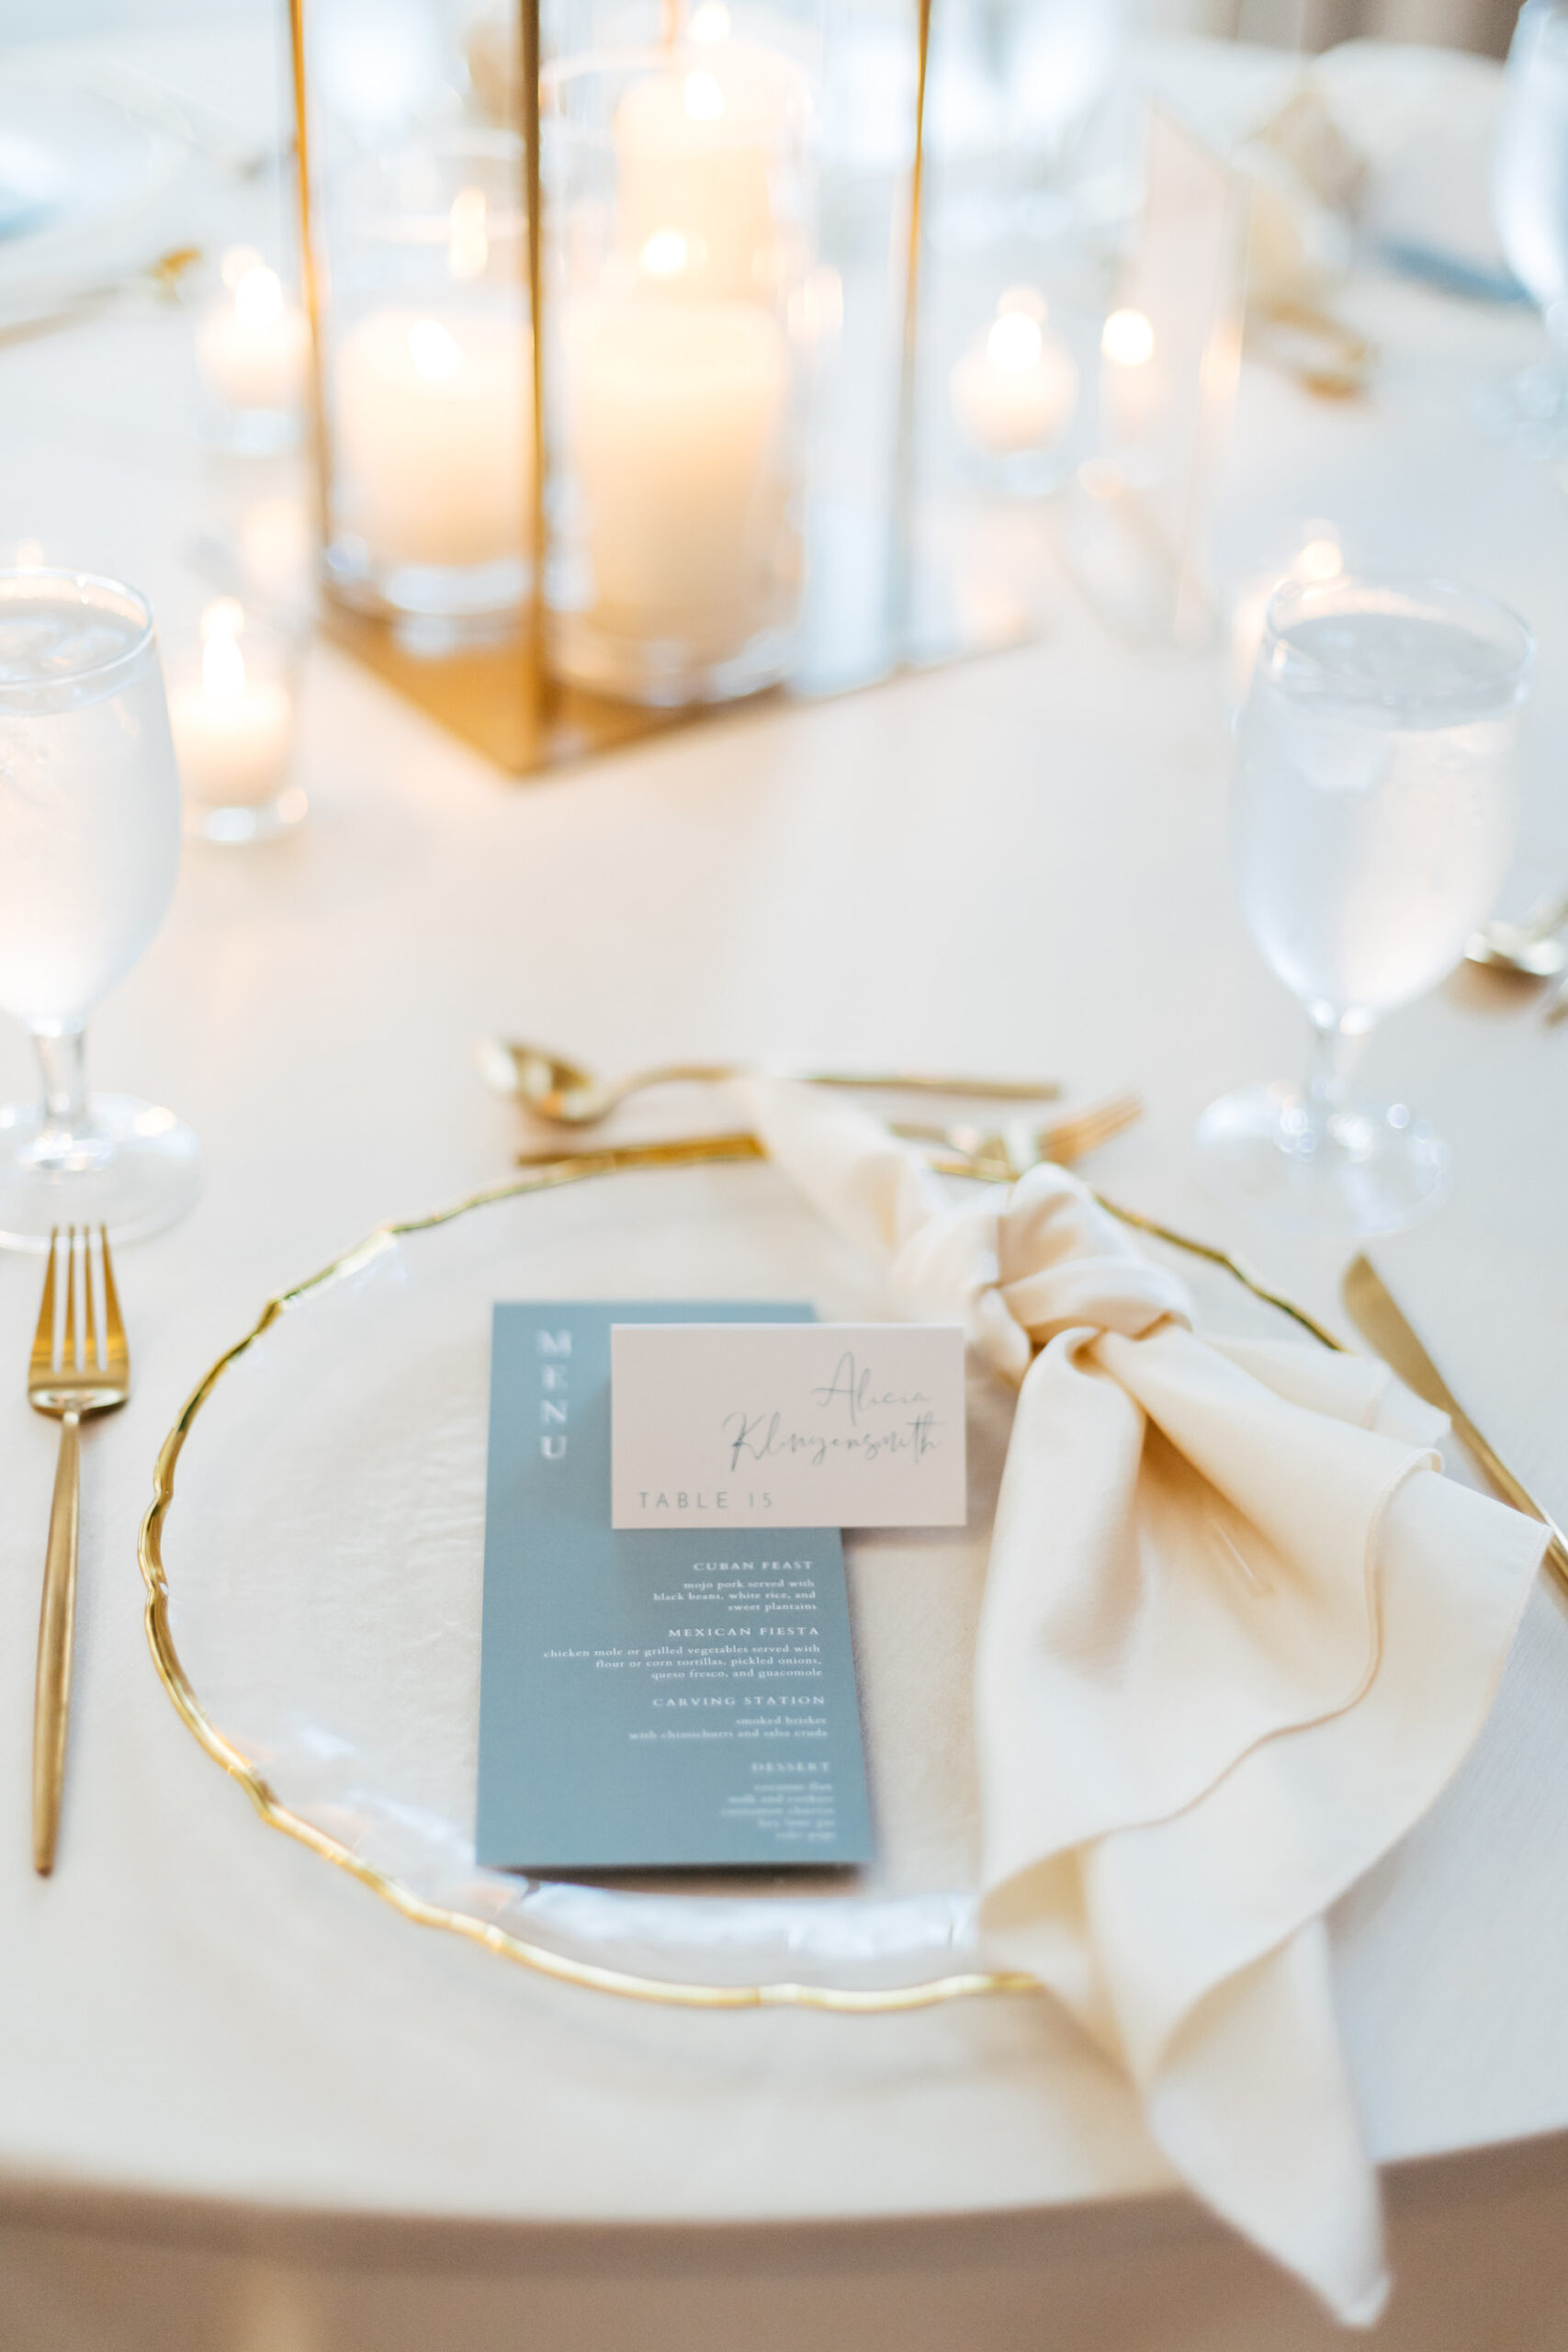 Romantic White Wedding Place Setting Inspiration, Gold-Rimmed Hammered Glass Chargers, Gold Flatware, Modern Menu Stationary, Gold Linen | Tampa Bay Wedding Decor Kate Ryan Event Rentals